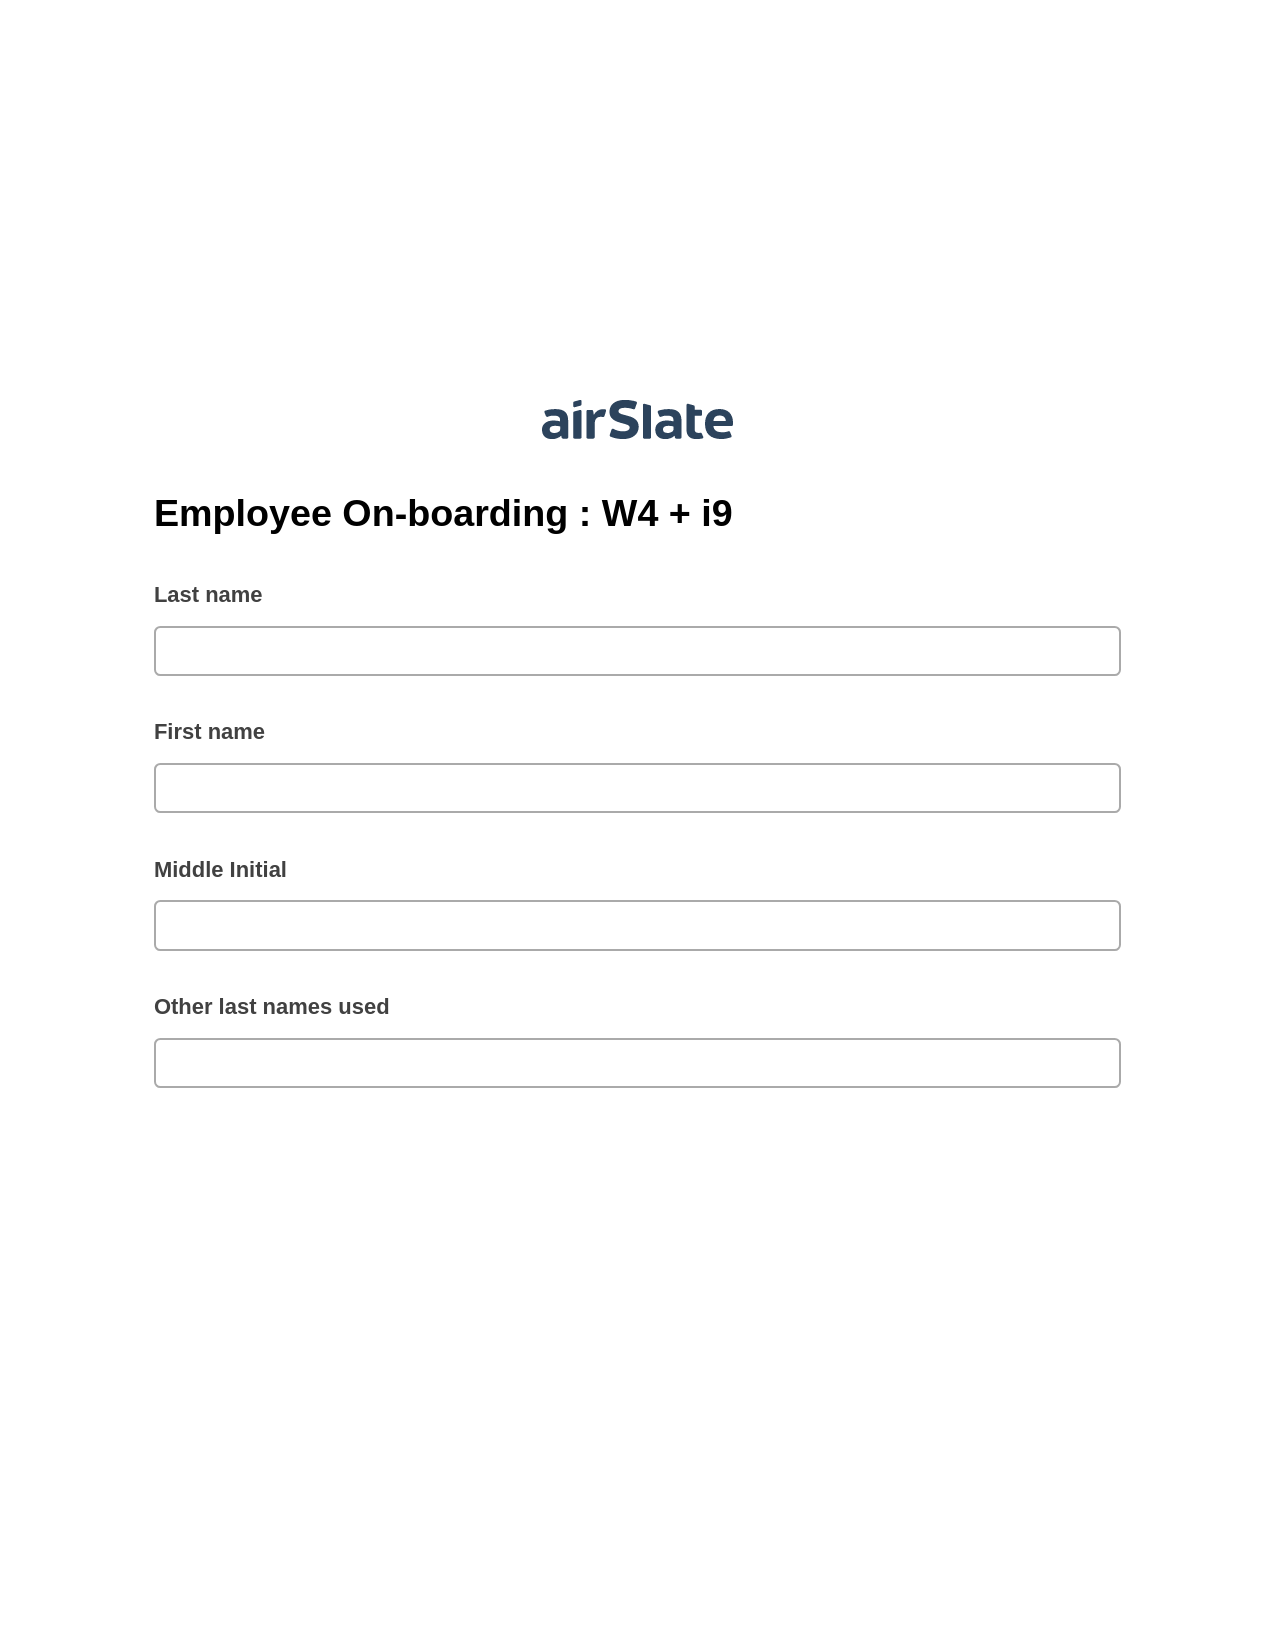 Employee On-boarding : W4 + i9 Pre-fill from Salesforce Records via SOQL Bot, Send a Slate to MS Dynamics 365 Contact Bot, Webhook Postfinish Bot